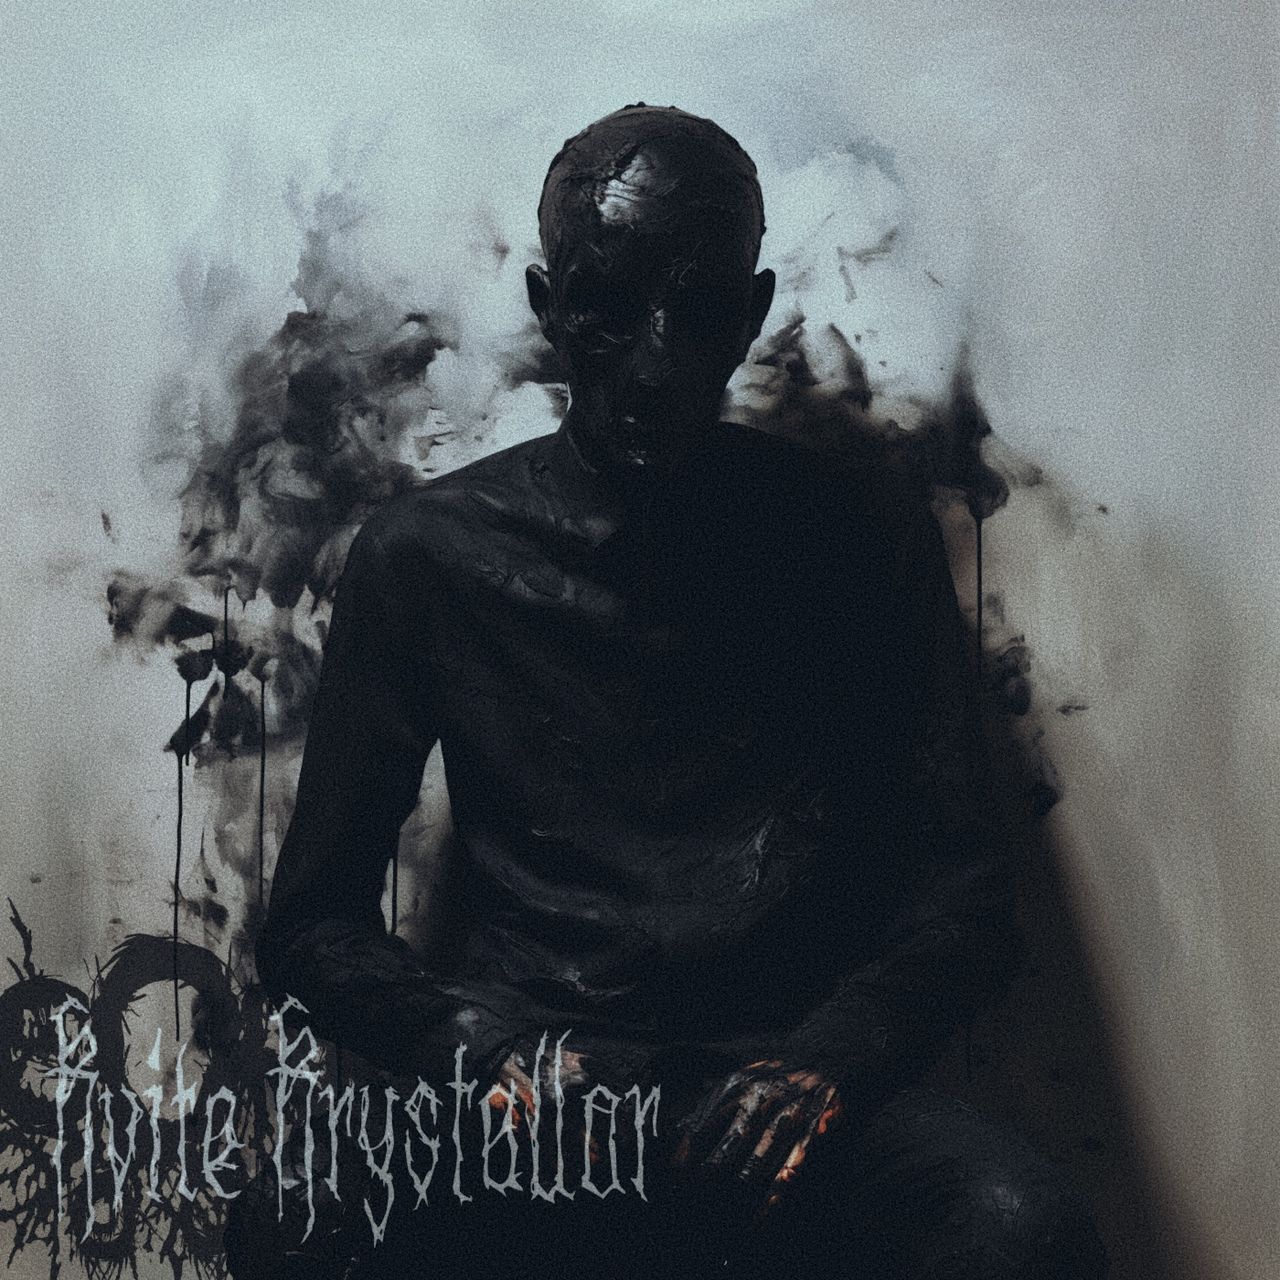 Coverart - burned person covered in ashes and dark ink